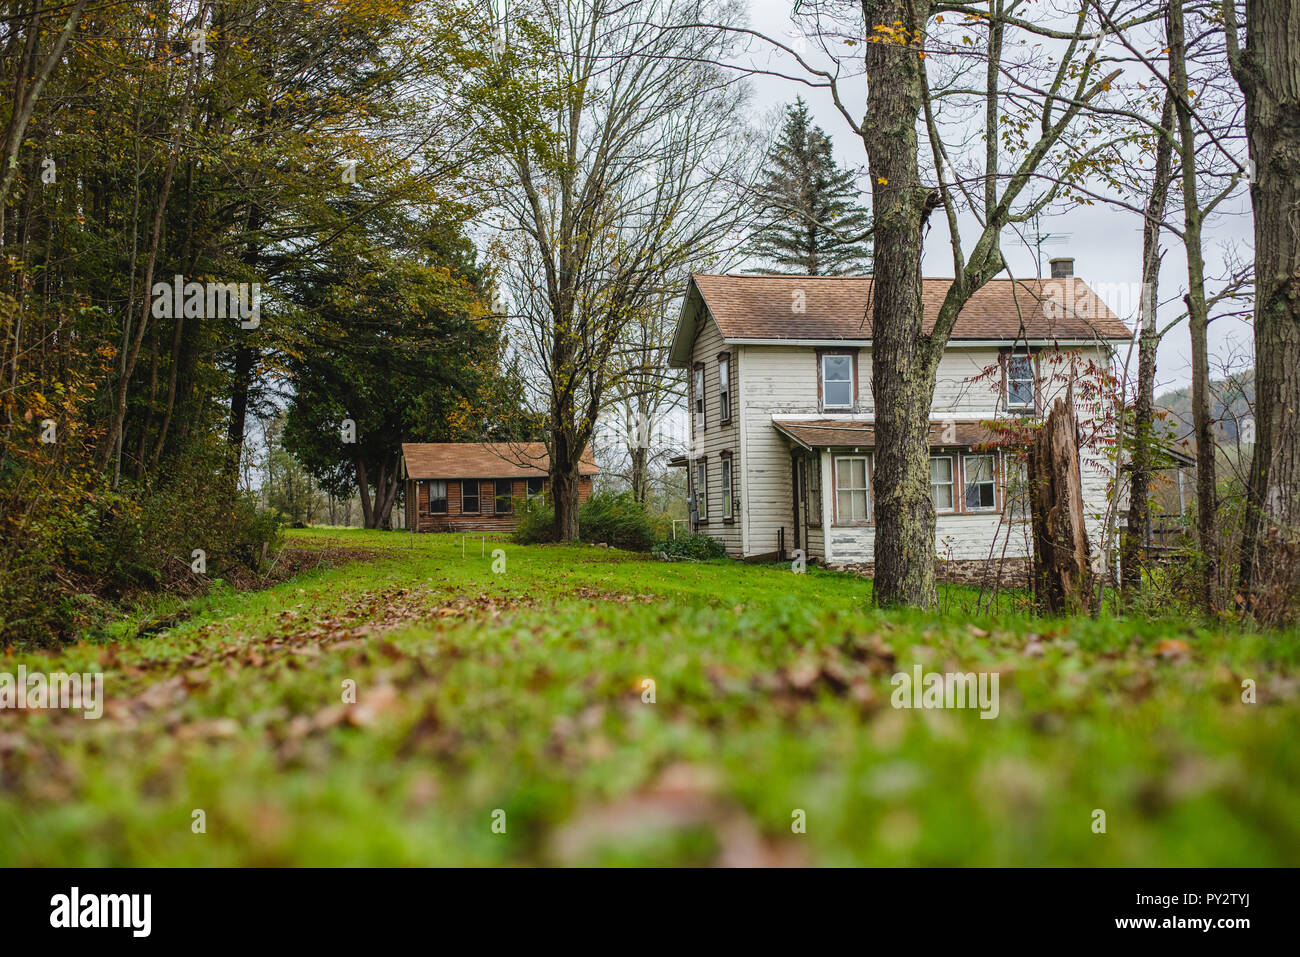 An old, white house on a rural grass covered road in the autumn in Pennsylvania, USA Stock Photo